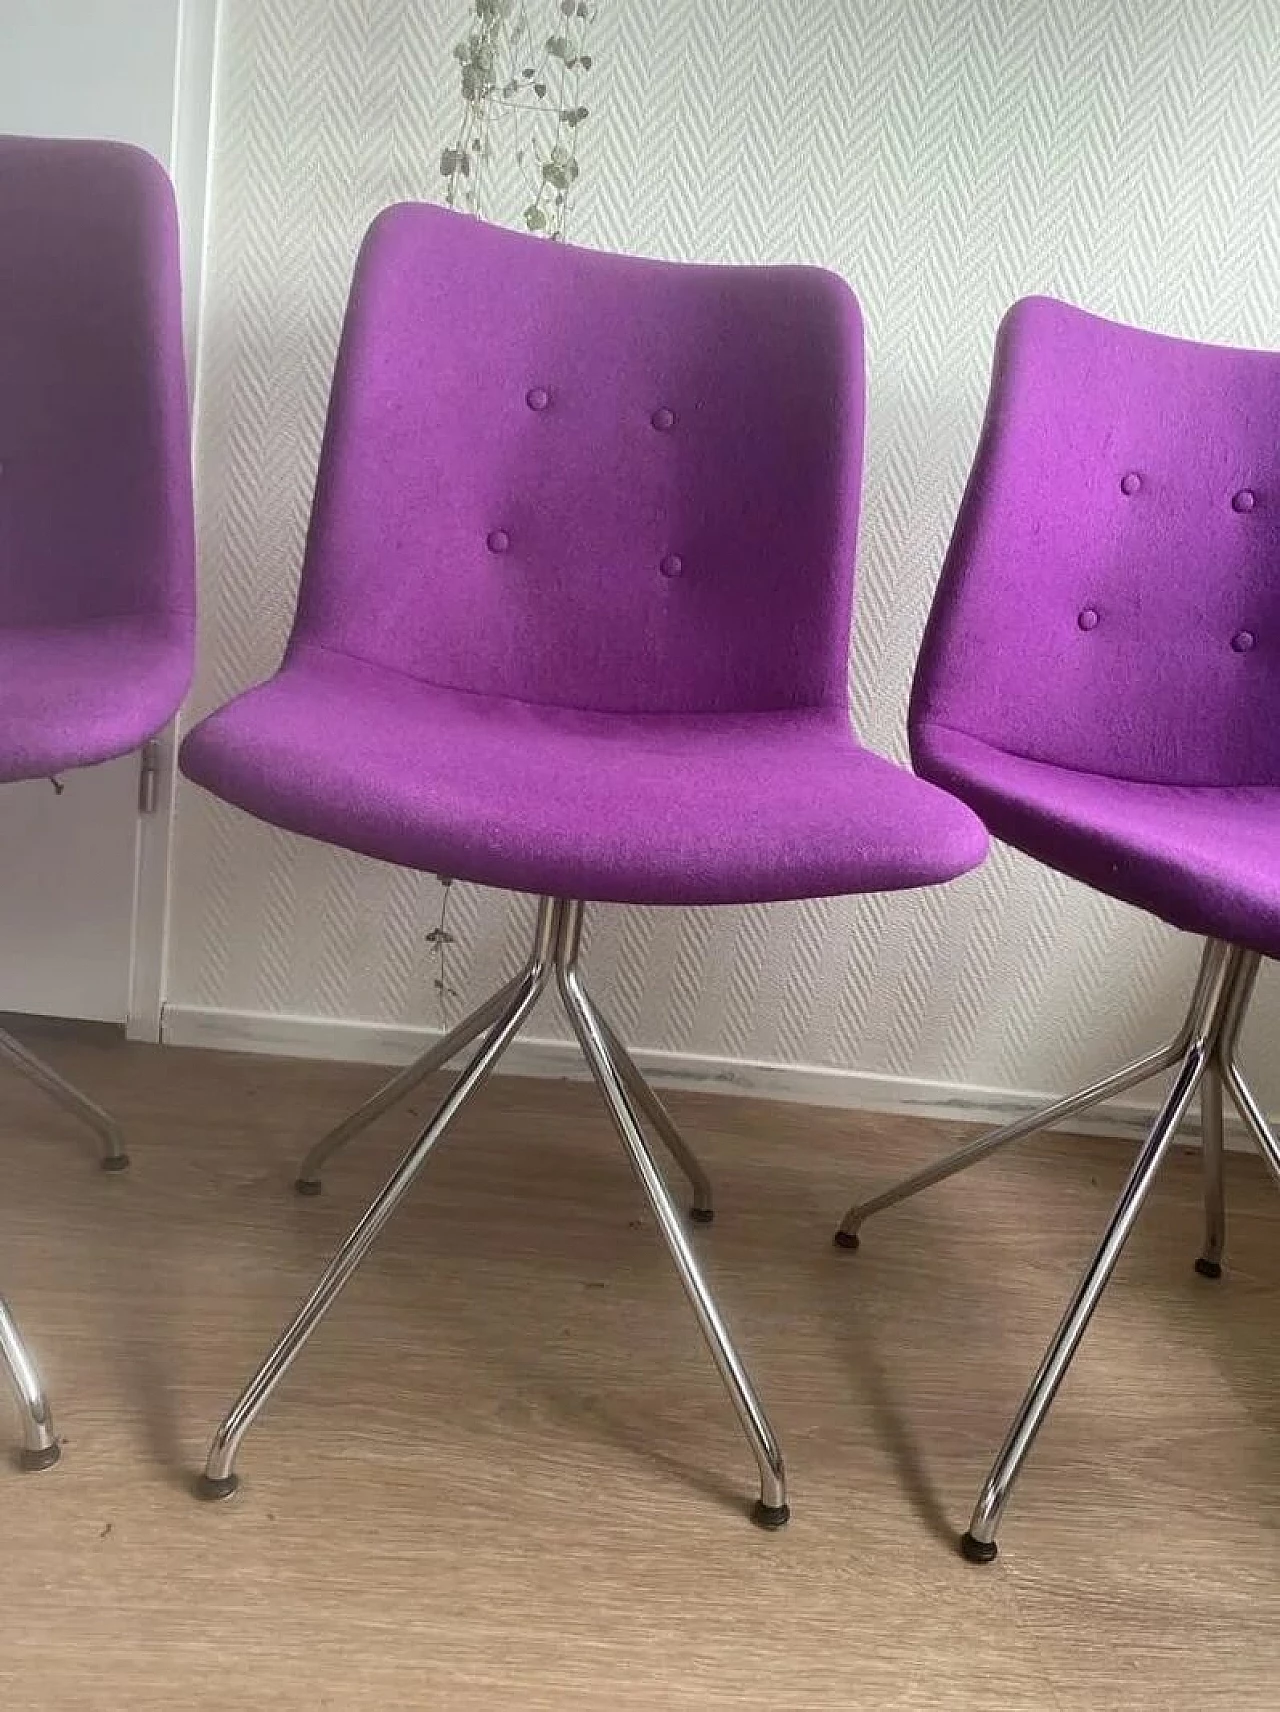 4 Primum Dynamic chairs in purple wool and metal by Bent Hansen 2